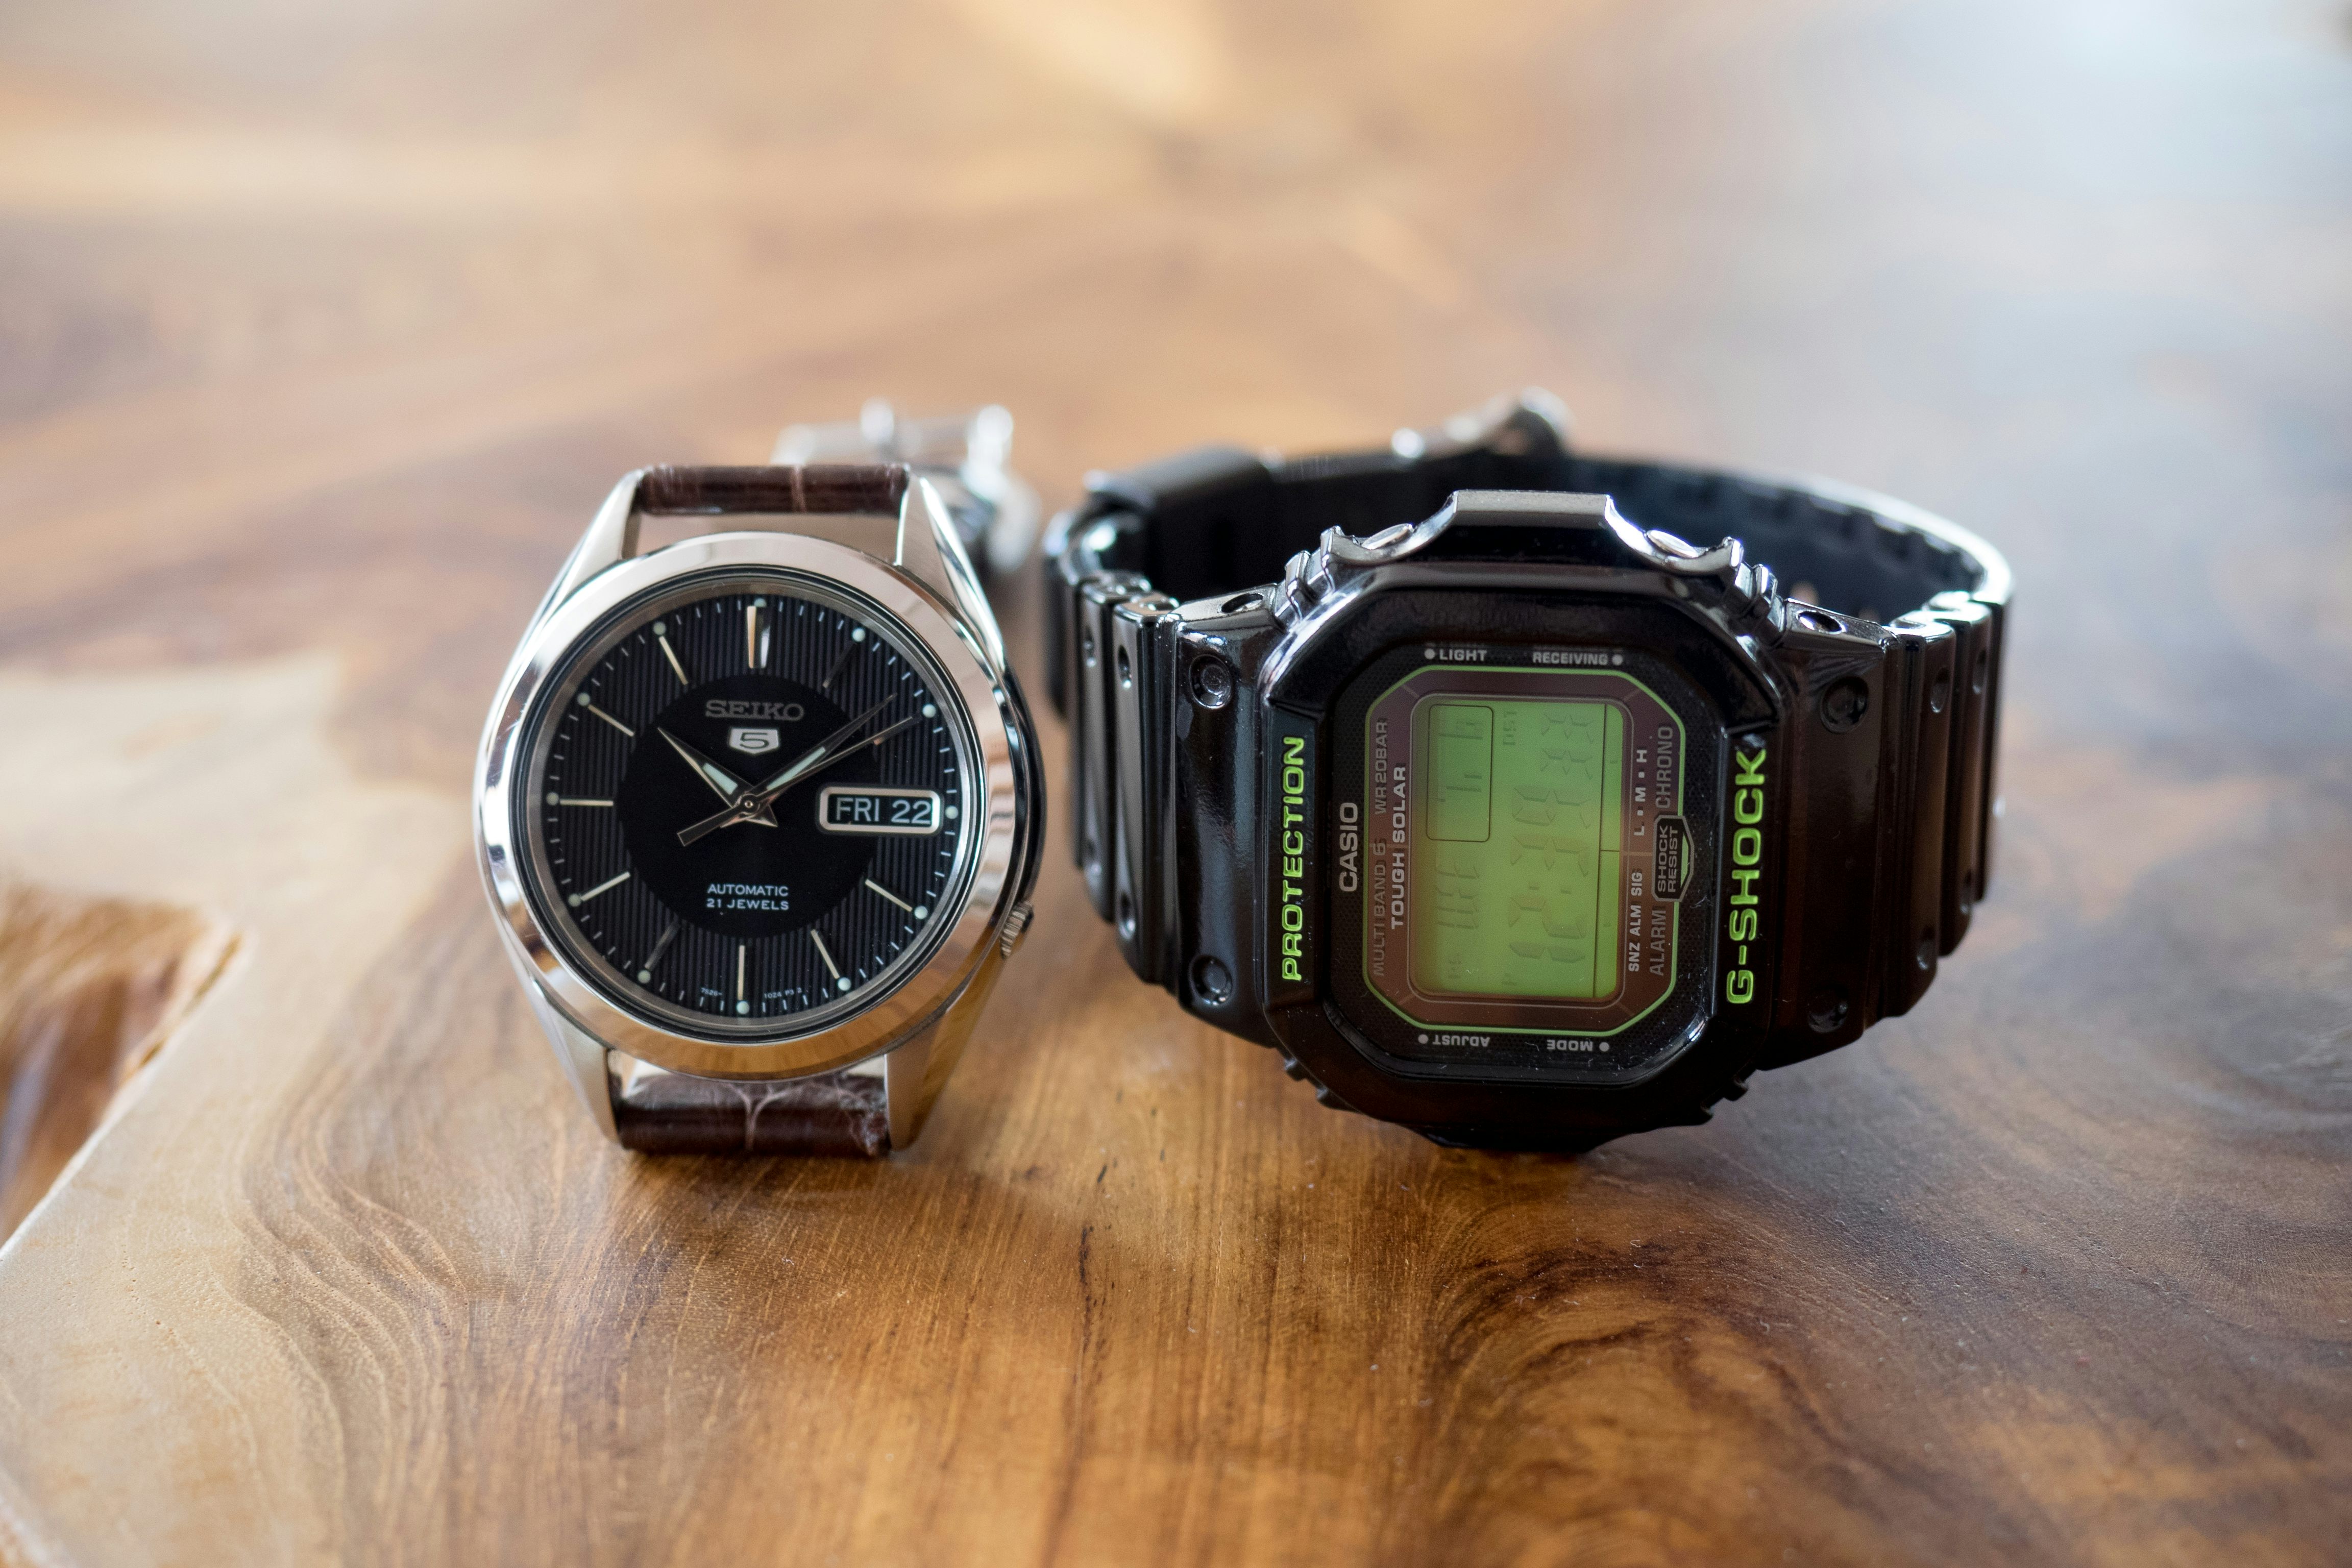 An In-Depth Look At The Iconic Casio F-91W